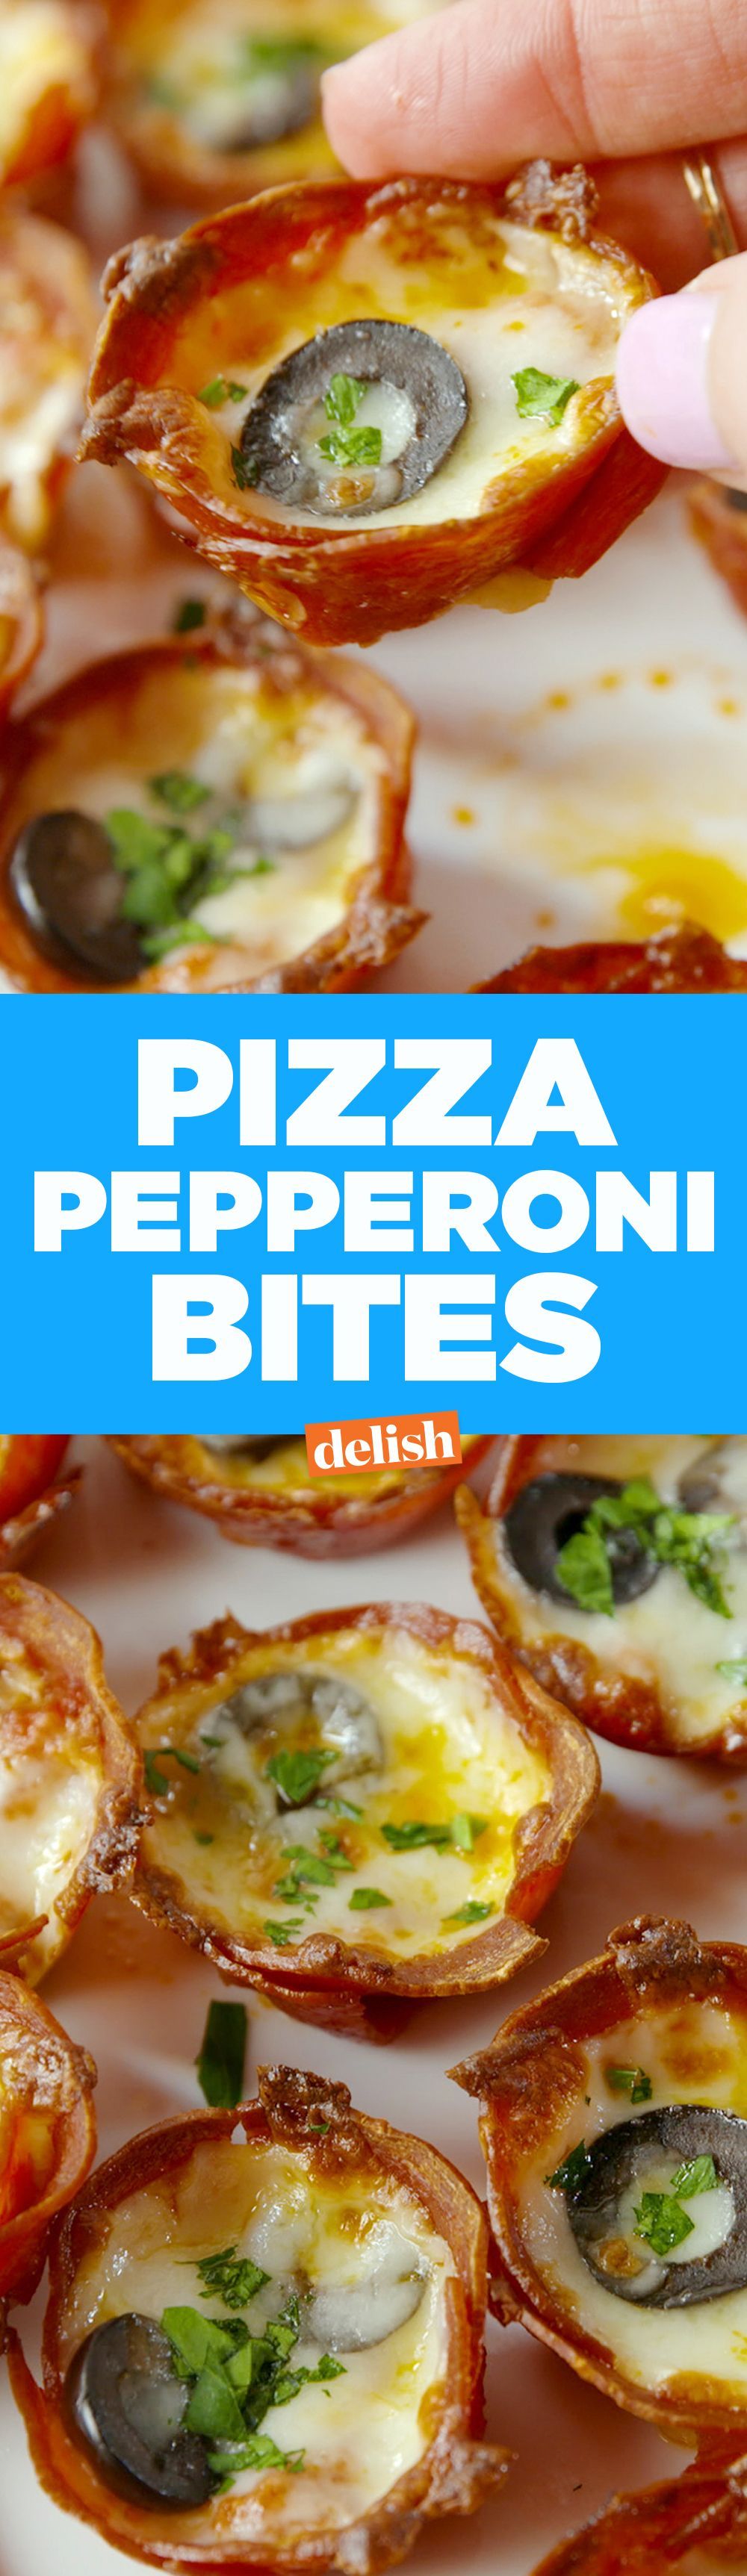 Pizza Pepperoni Bites are the low-carb snack you’ll actually look forward to eating. Get the recipe on Delish.com.